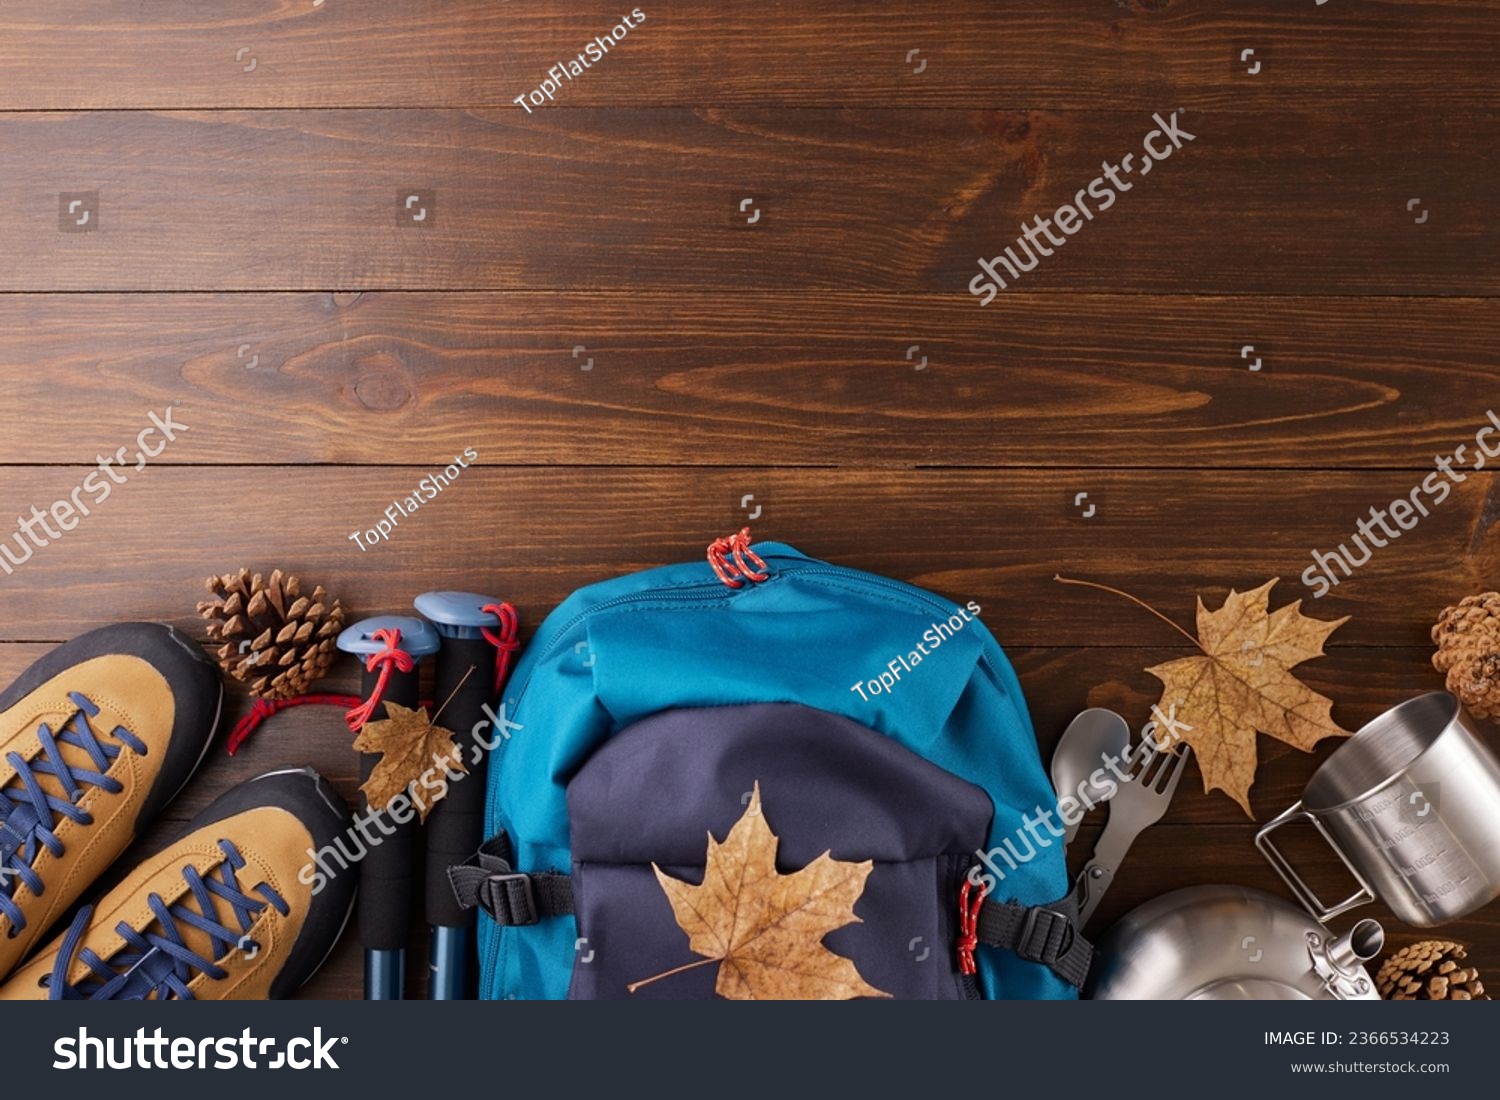 Embracing autumn's charm through hiking. Top view photo of metal utensils, trekking boots, hiking backpack, trekking sticks, cones, fallen leaves on wooden background with promo spot #2366534223